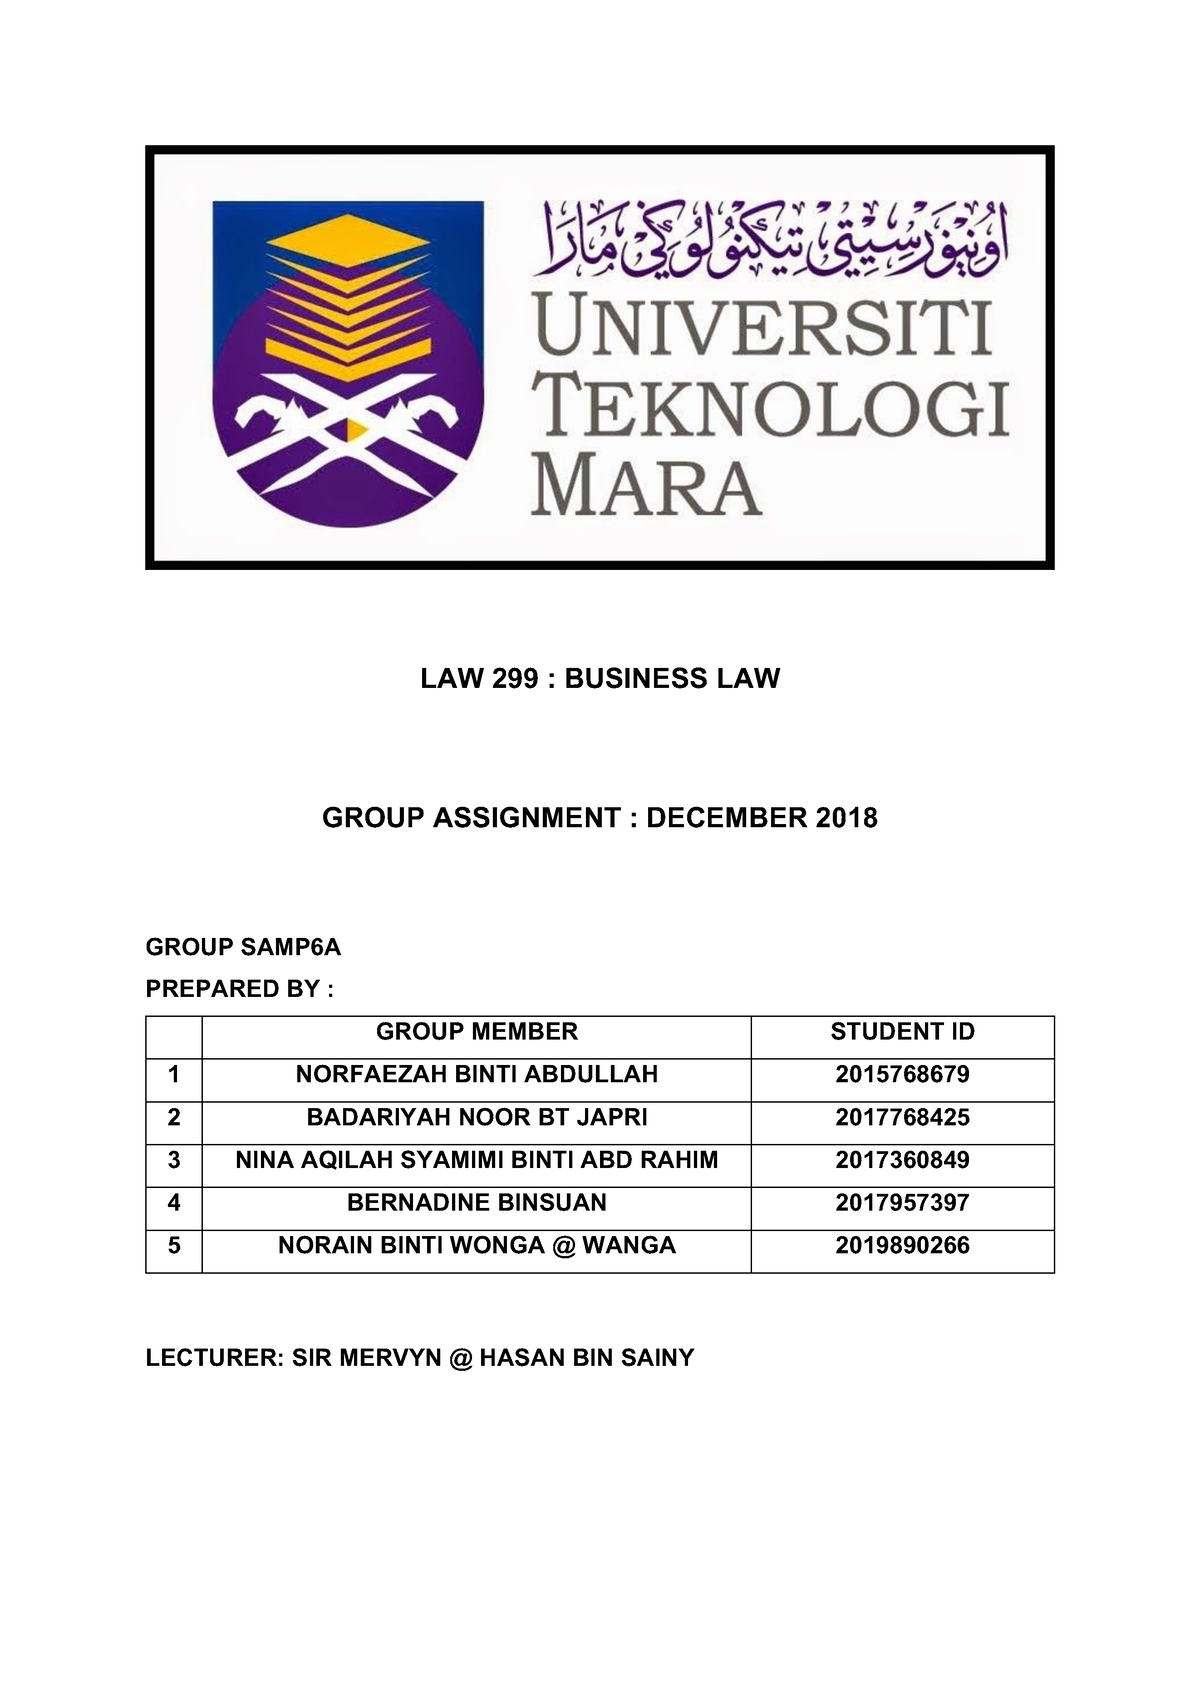 group assignment law299